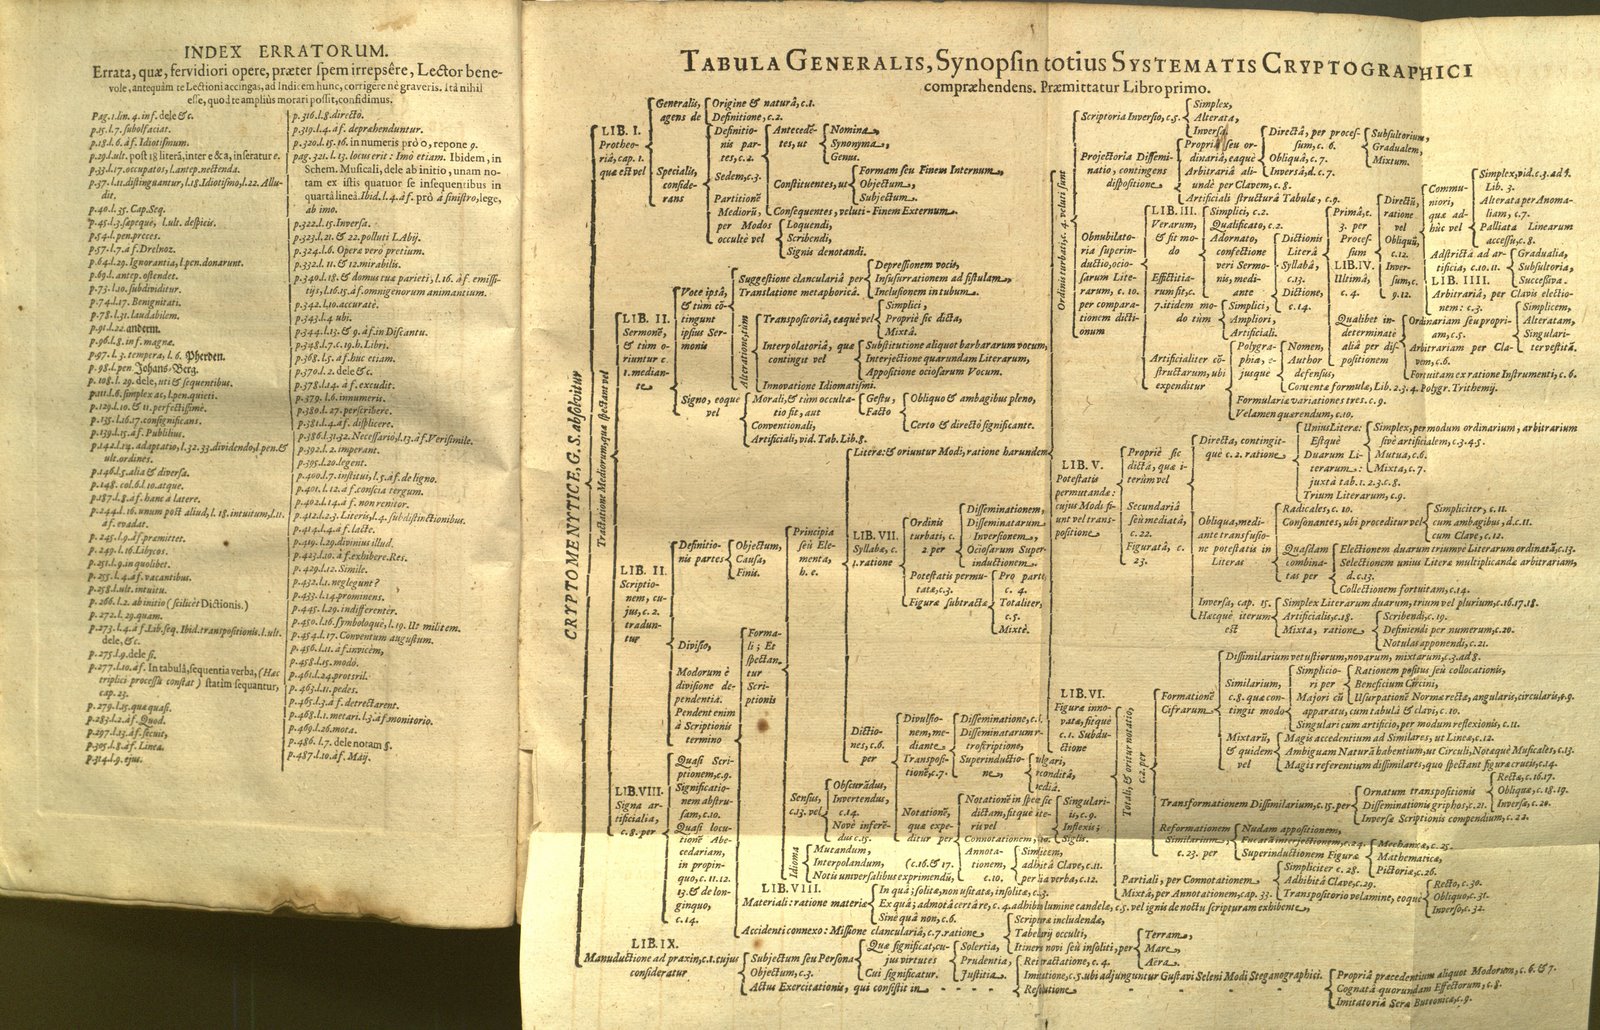 A large schema detailing the relationship of various parts of the field to one another is included on a folding plate just before the first chapter of the book